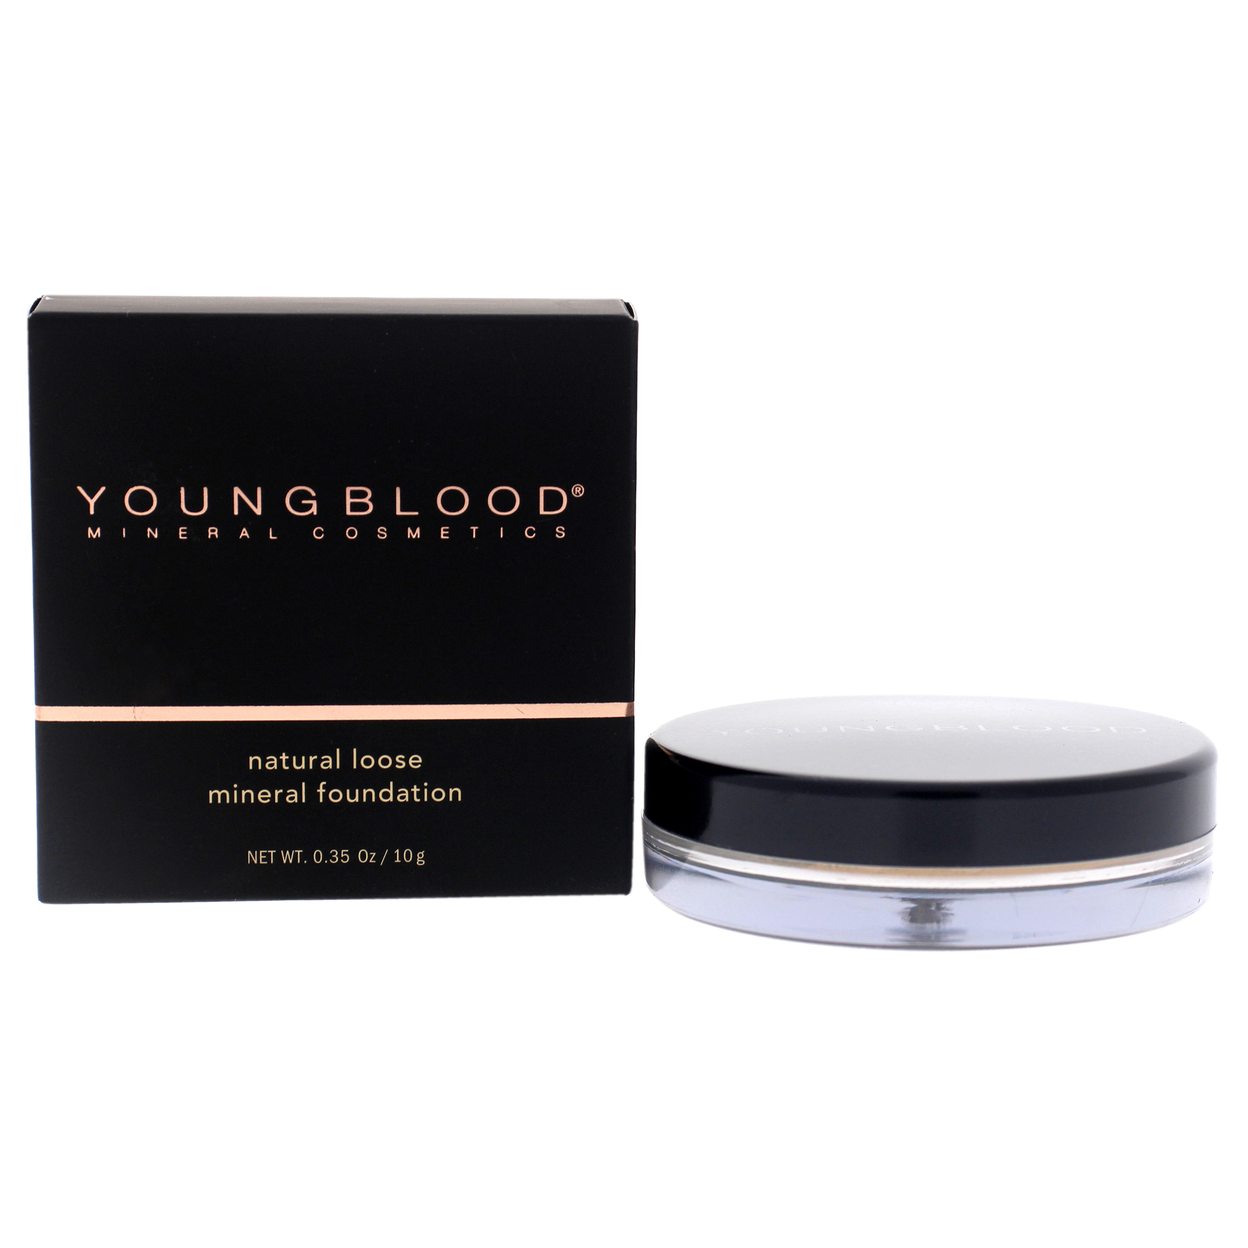 Youngblood Natural Loose Mineral Foundation - Barely Beige Foundation 0.35 Oz